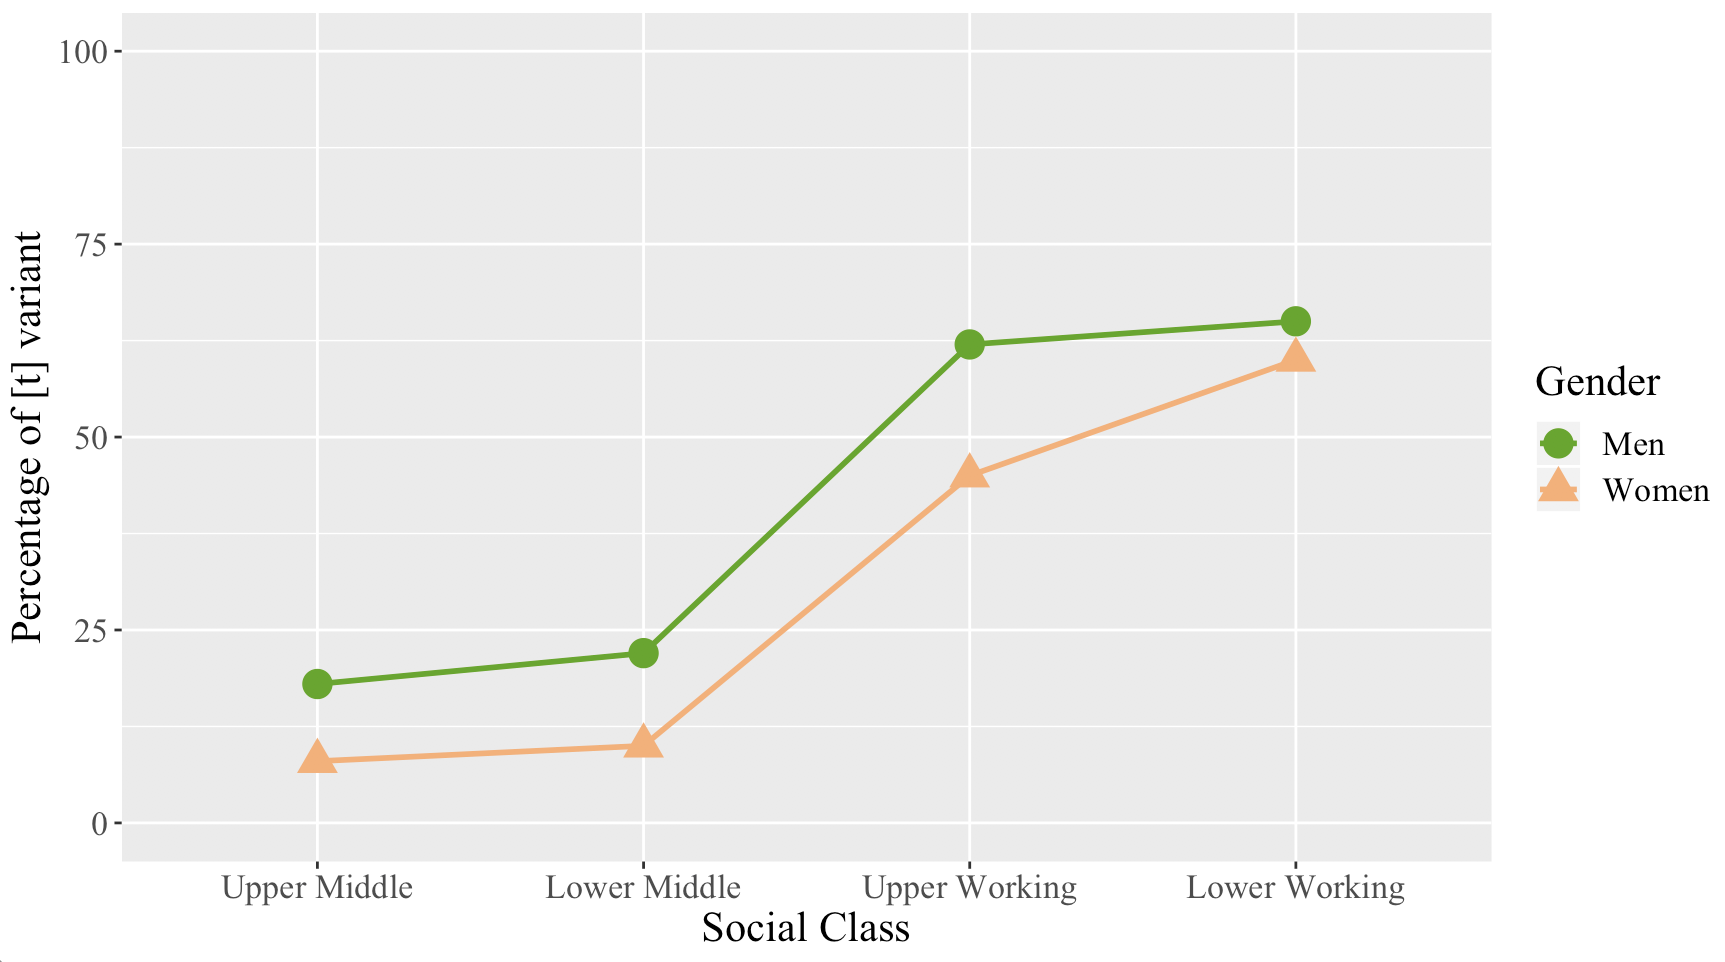 Graph showing social class on x-axis with four levels (upper middle, lower middle, upper working, and lower working). Y-axis shows percentage of [t] variant. Two different coloured lines represent an independent variable of gender with two levels: men and women. Both lines gradually increase from Upper Middle to Lower Working and the line representing men is always higher than the line representing women.